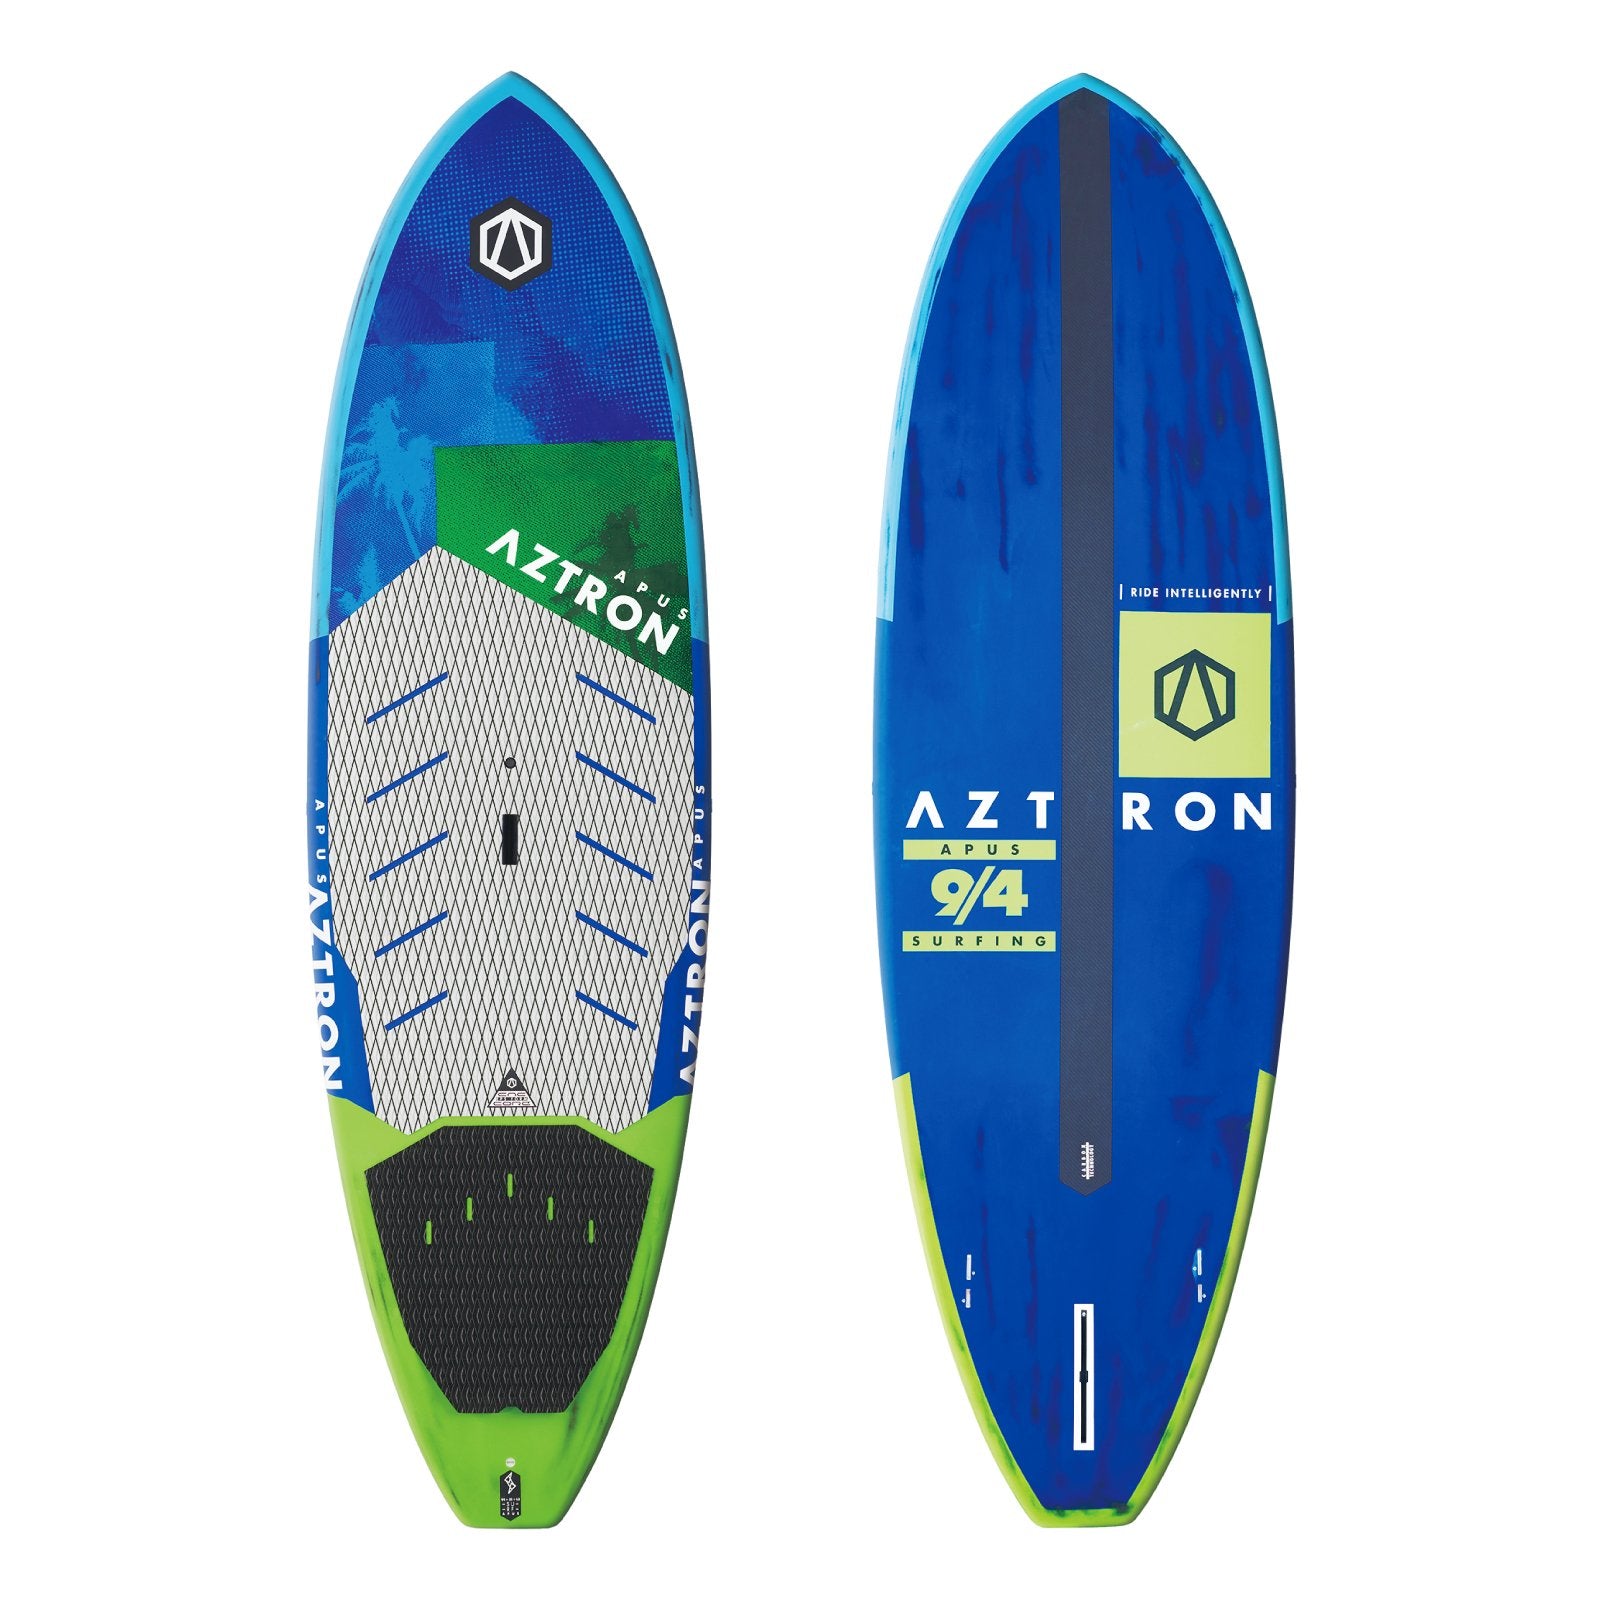 Aztron APUS Carbon Surf SUP 9'4" - Worthing Watersports - AH-501 - SUP Composite - Aztron